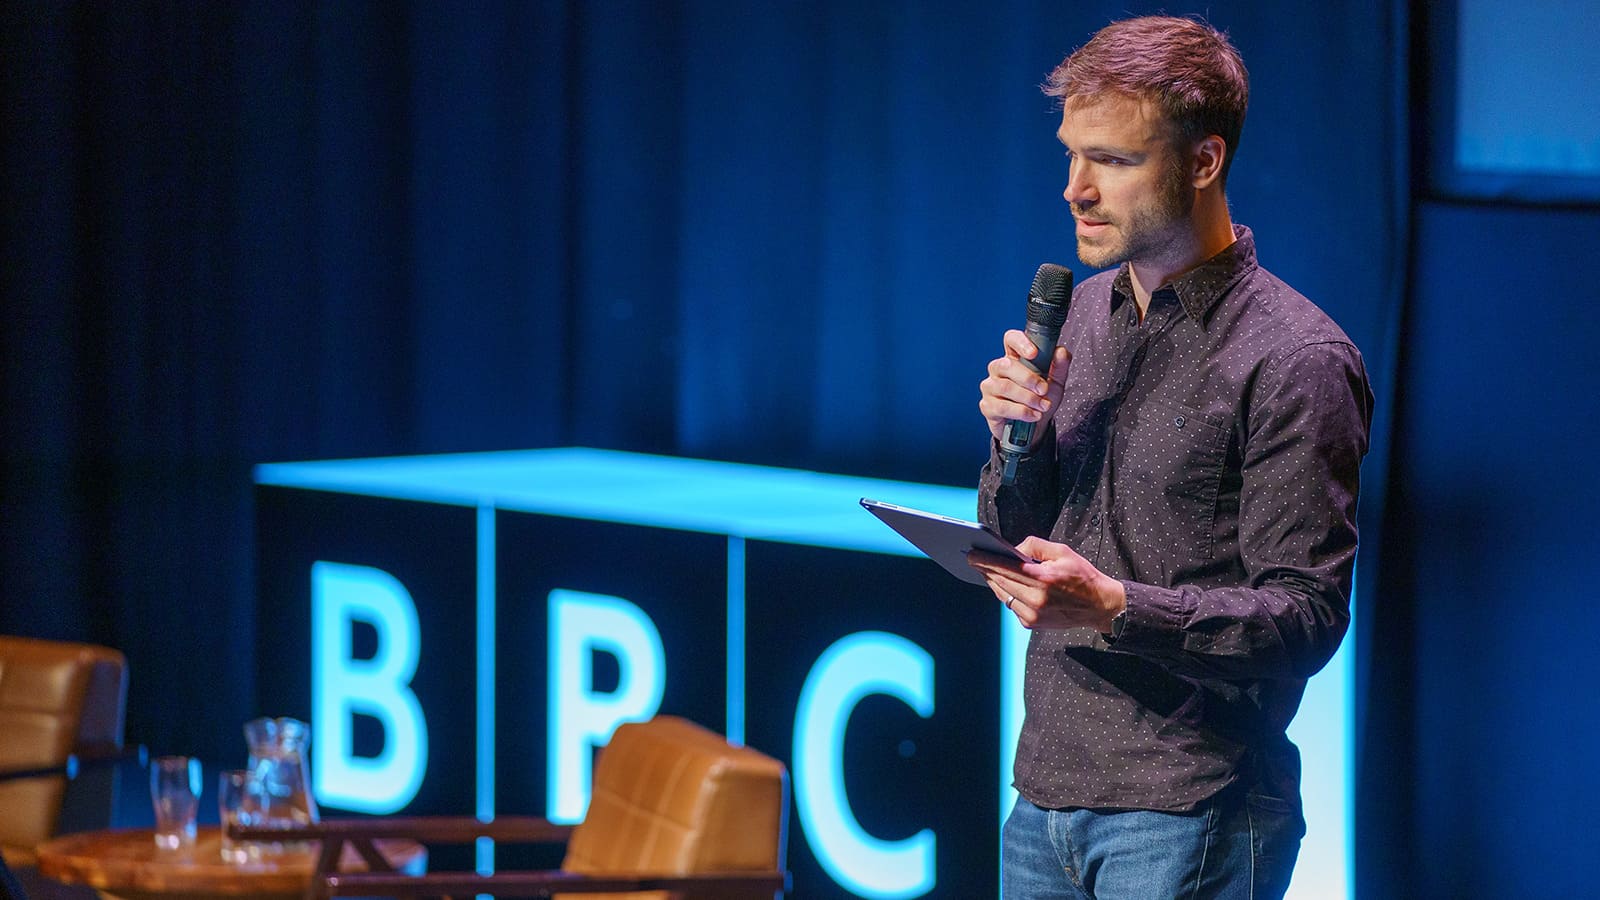 A man stands on a stage speaking into a microphone. Behind him is a large version of the BBC logo.